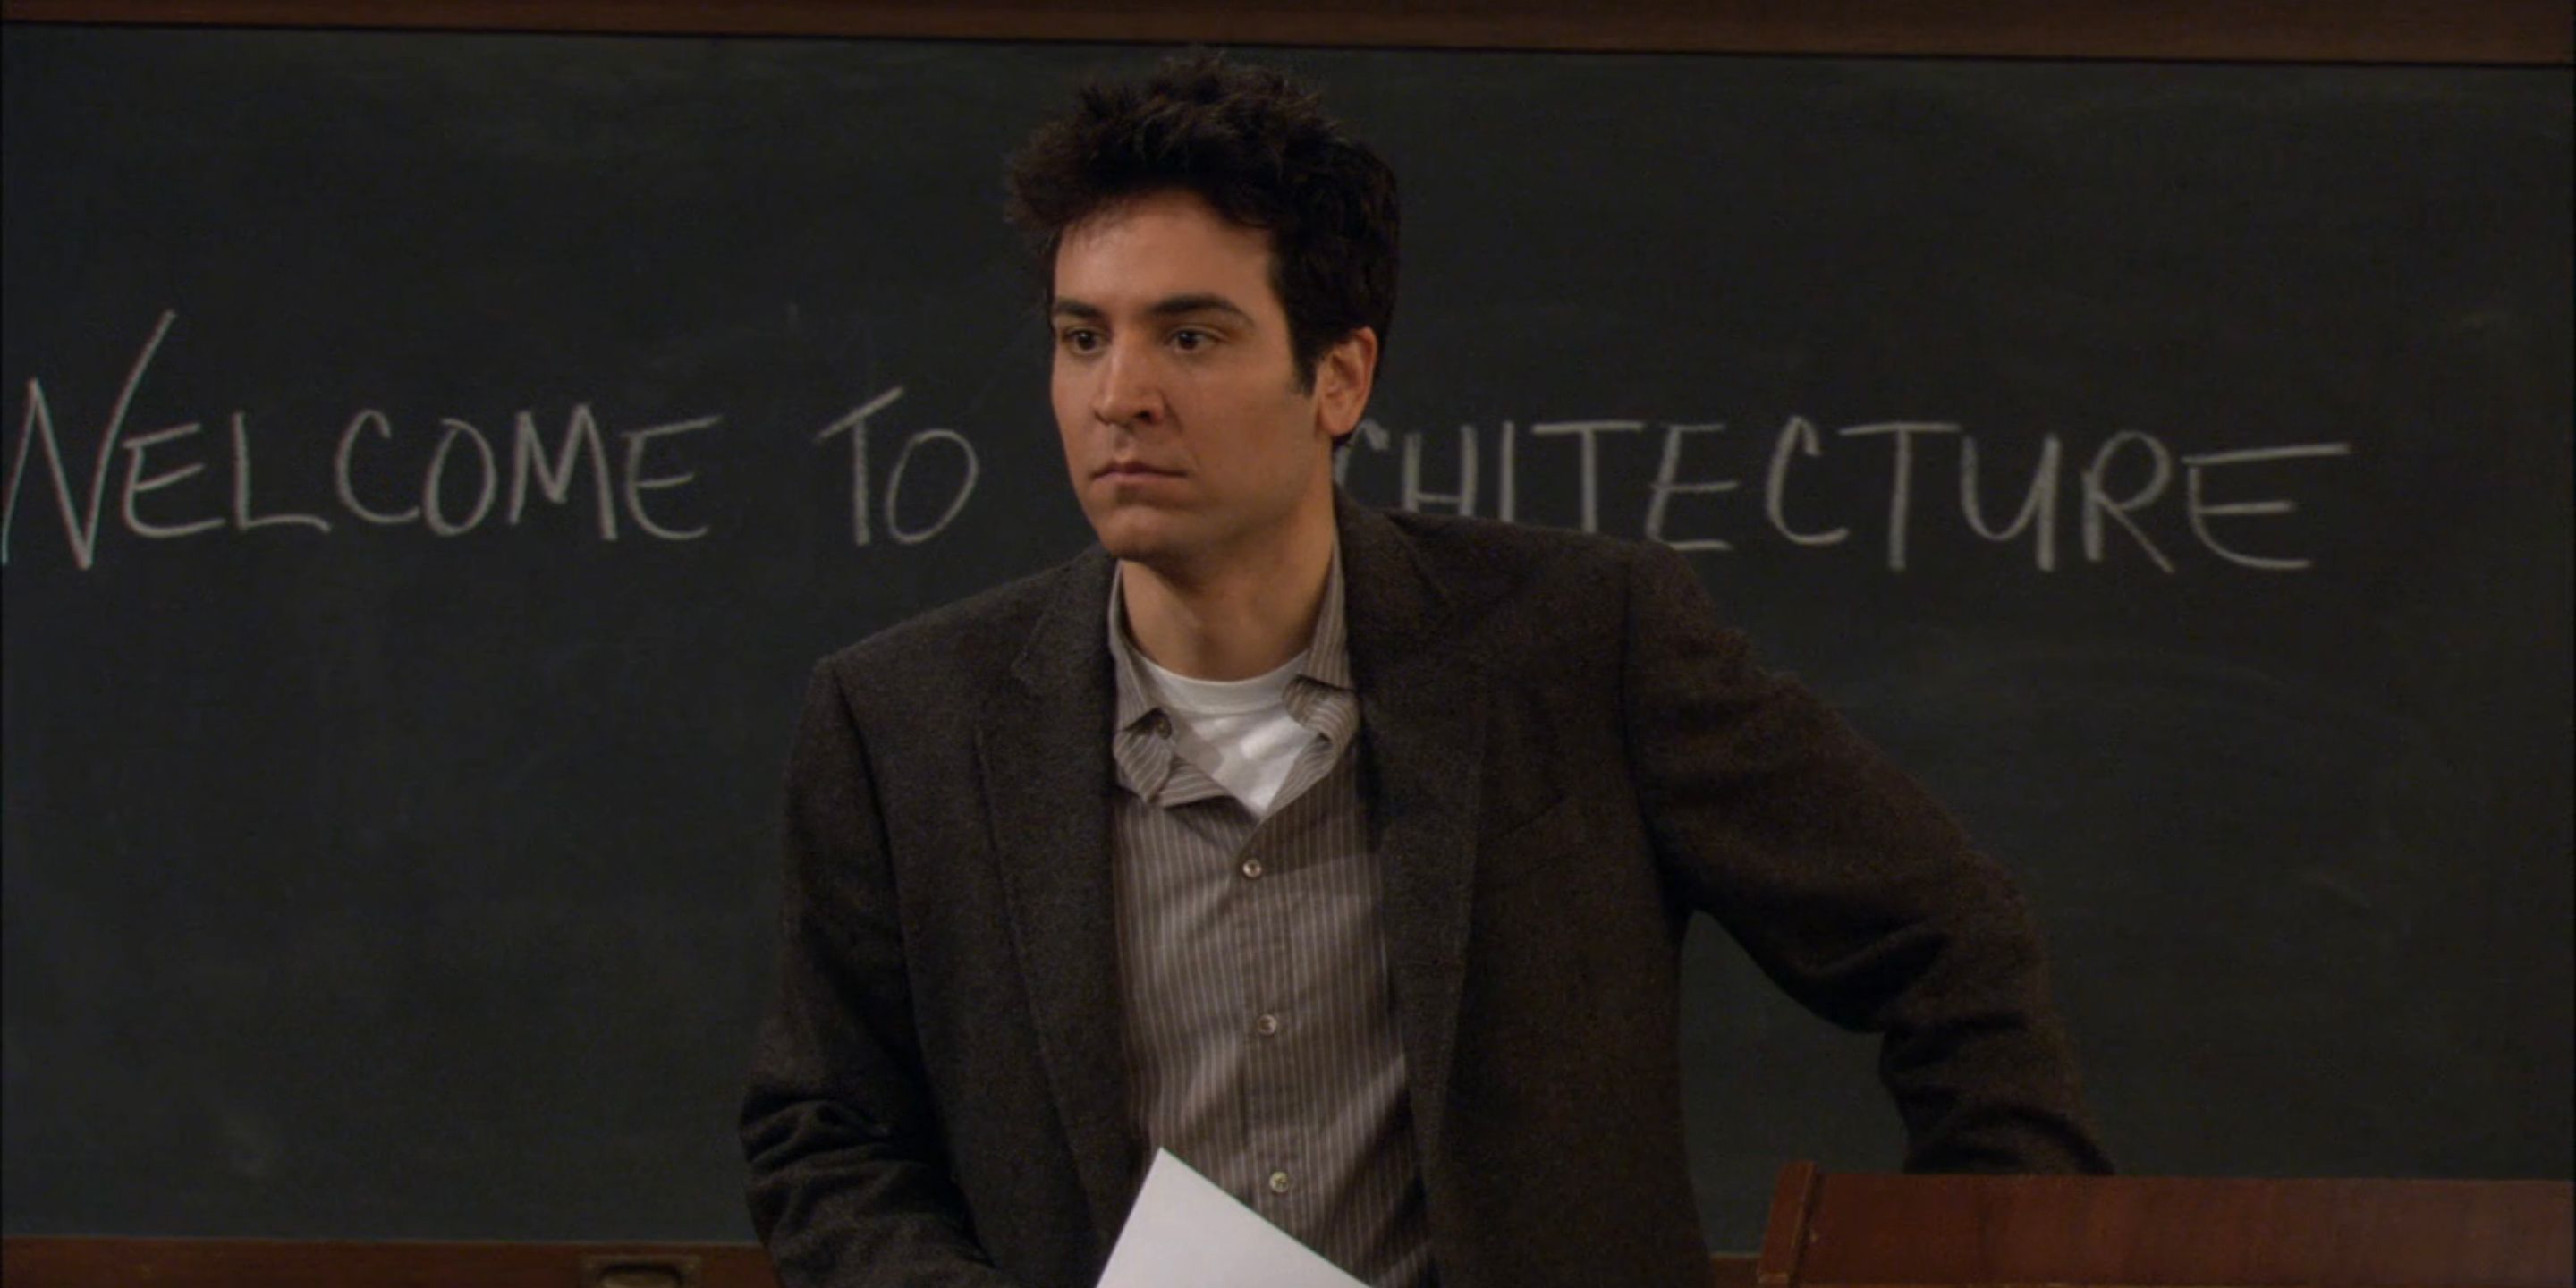 Ted makes fun of a student's name in How I Met Your Mother.